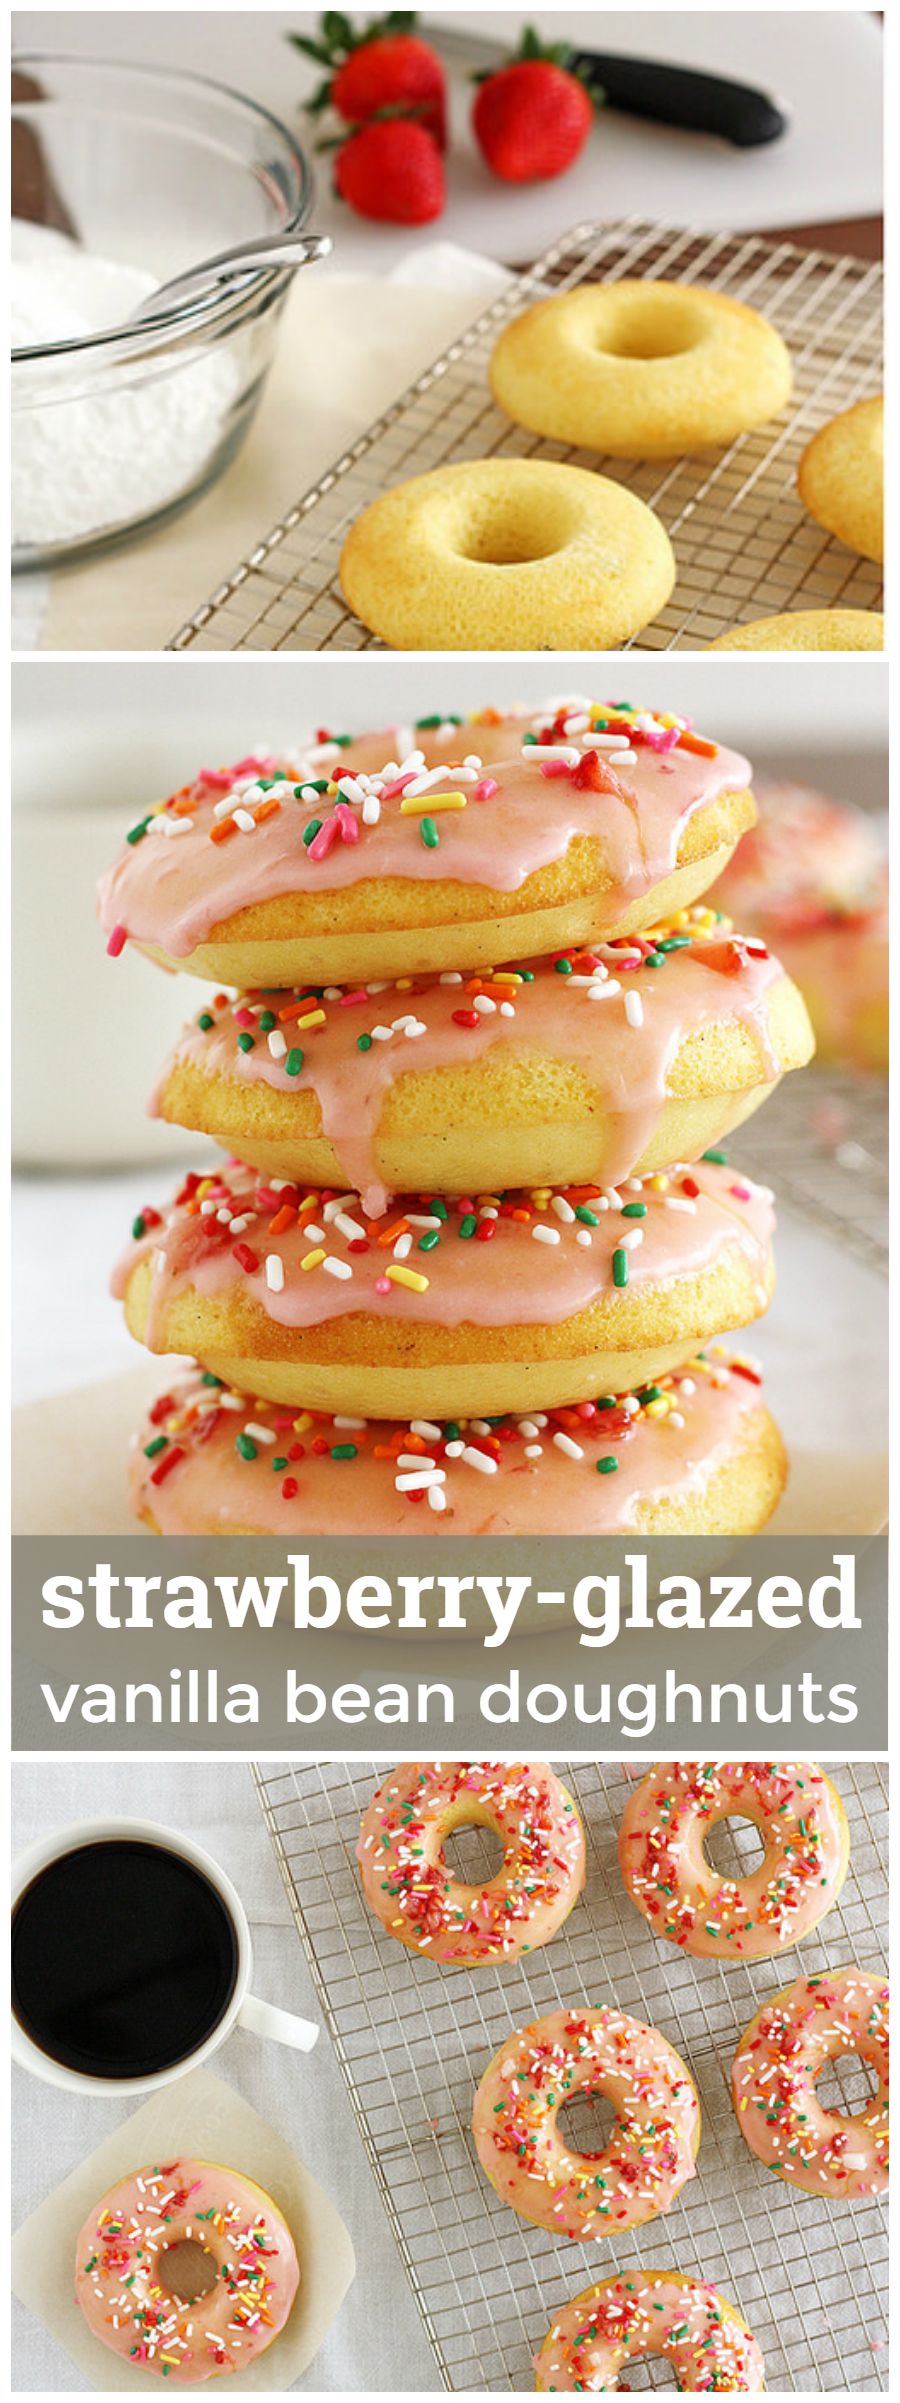 Strawberry Glazed Vanilla Bean Doughnuts -- Baked doughnuts with a sprinkles-topped glaze, better than anything store-bought! www.girlversusdough.com @girlversusdough